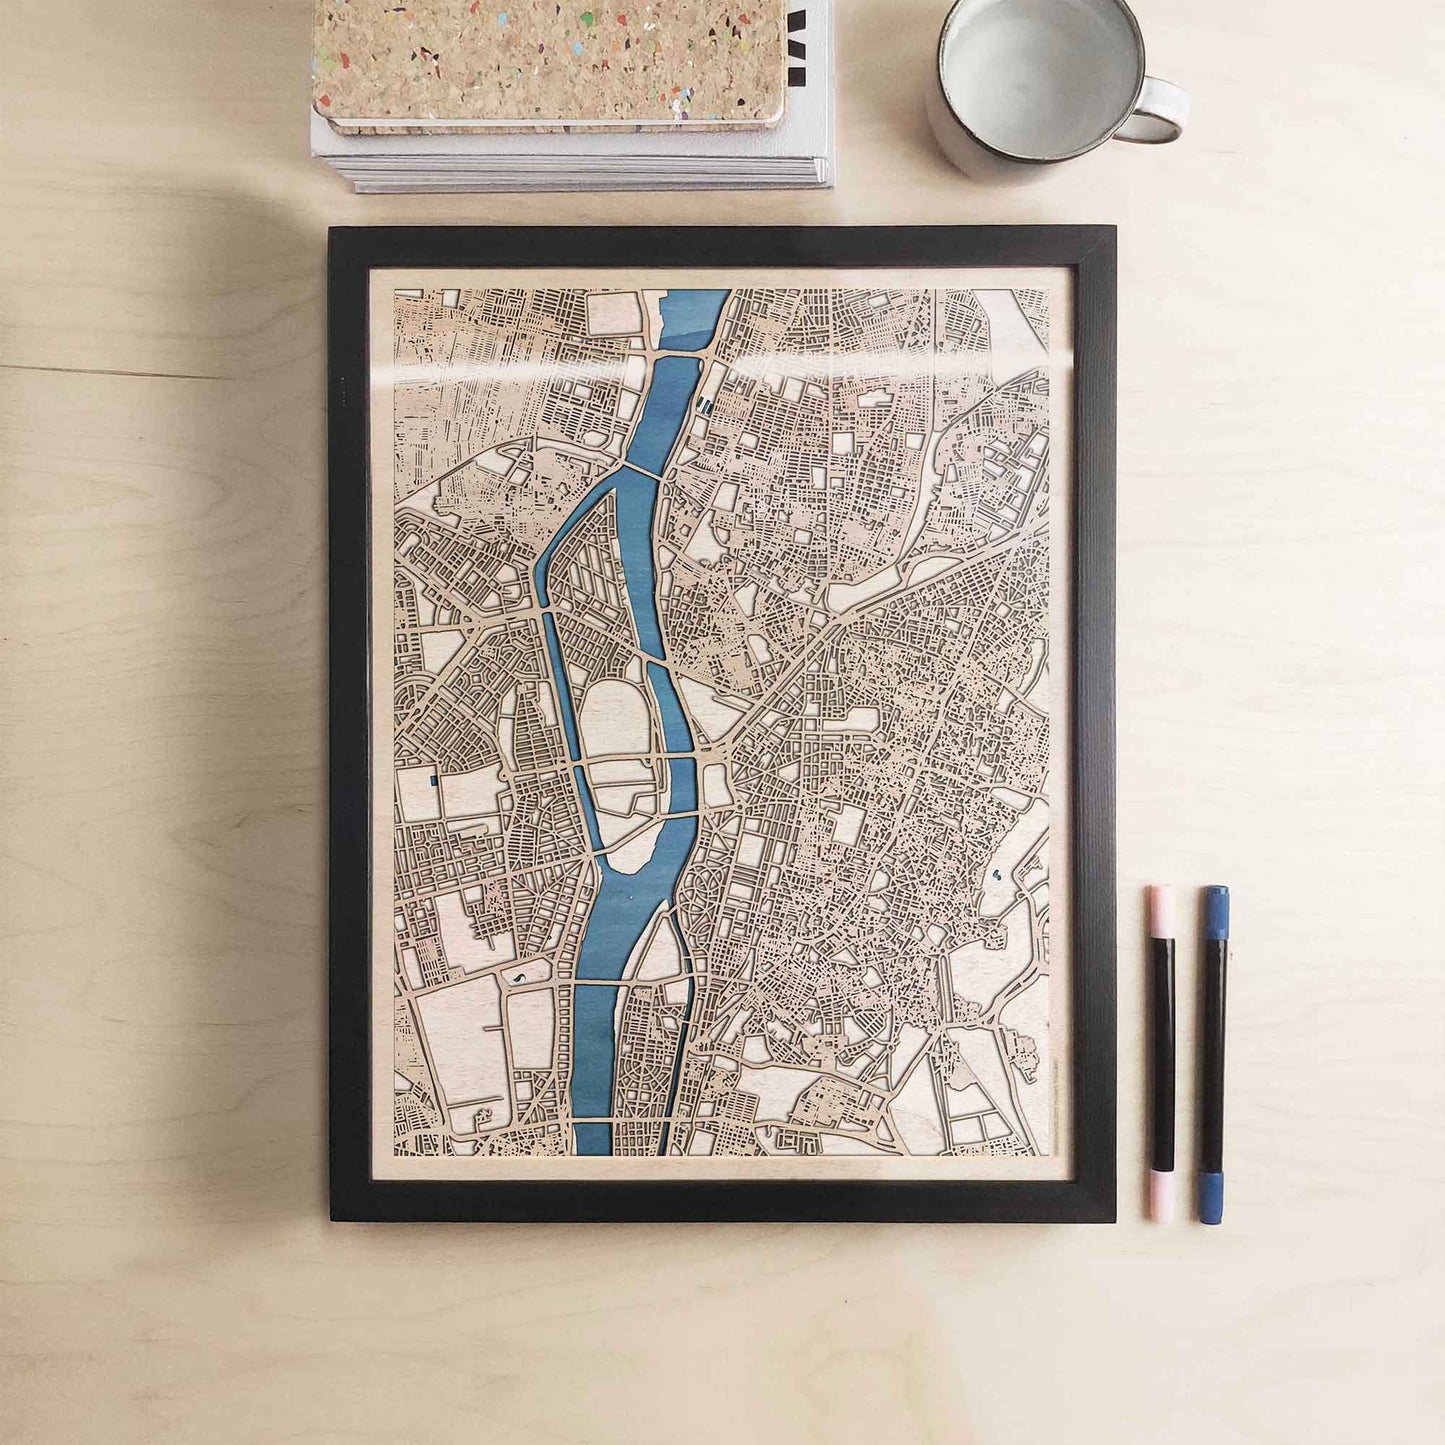 Cairo Wooden Map by CityWood - Custom Wood Map Art - Unique Laser Cut Engraved - Anniversary Gift